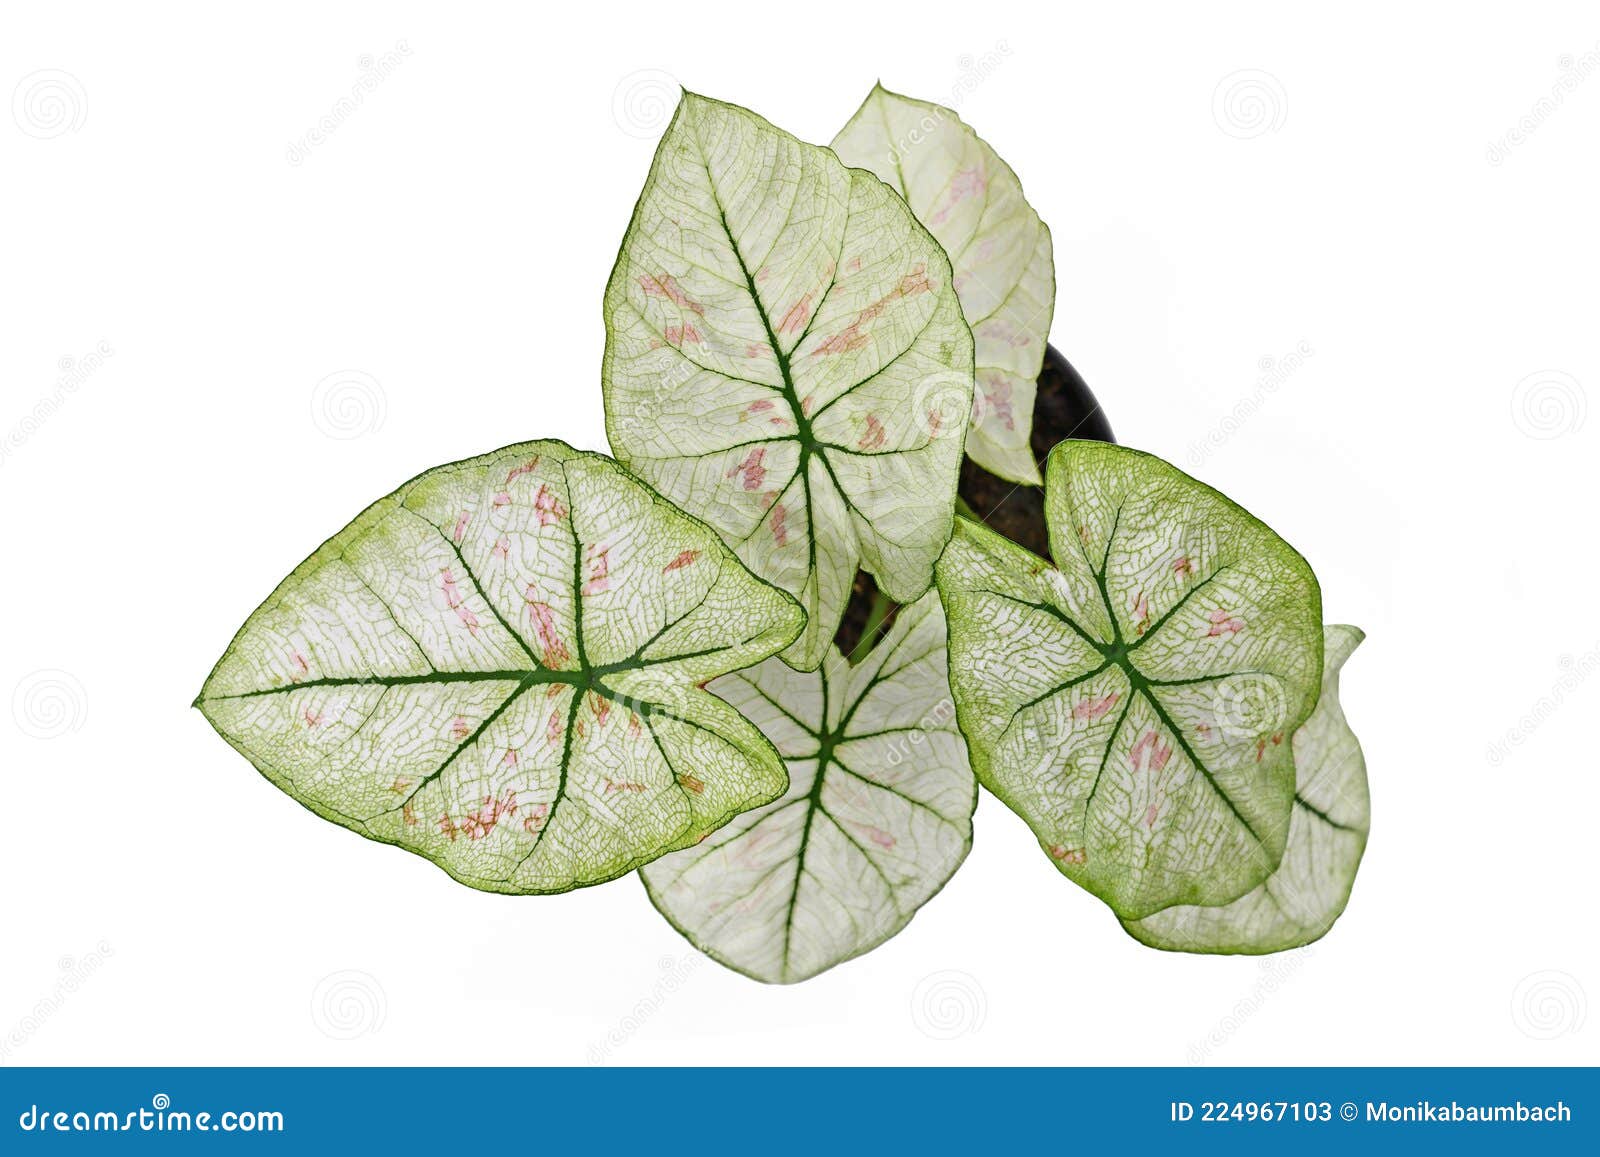 Top View of Exotic `Caladium Bicolor Strawberry Star` Houseplant with ...